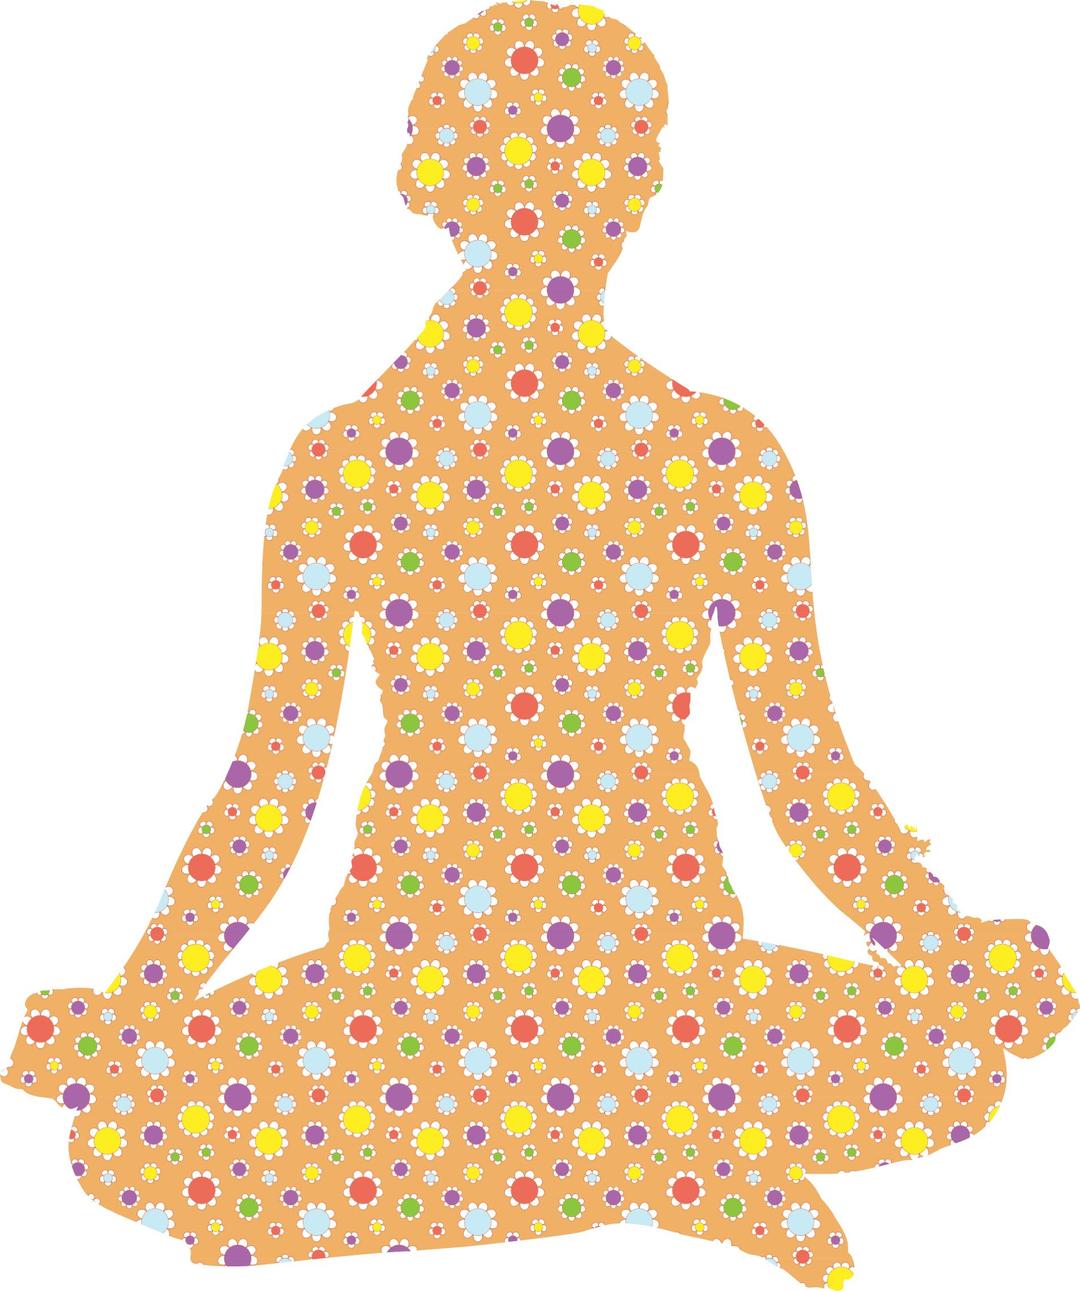 Cute Floral Female Yoga Pose Silhouette 7 png transparent